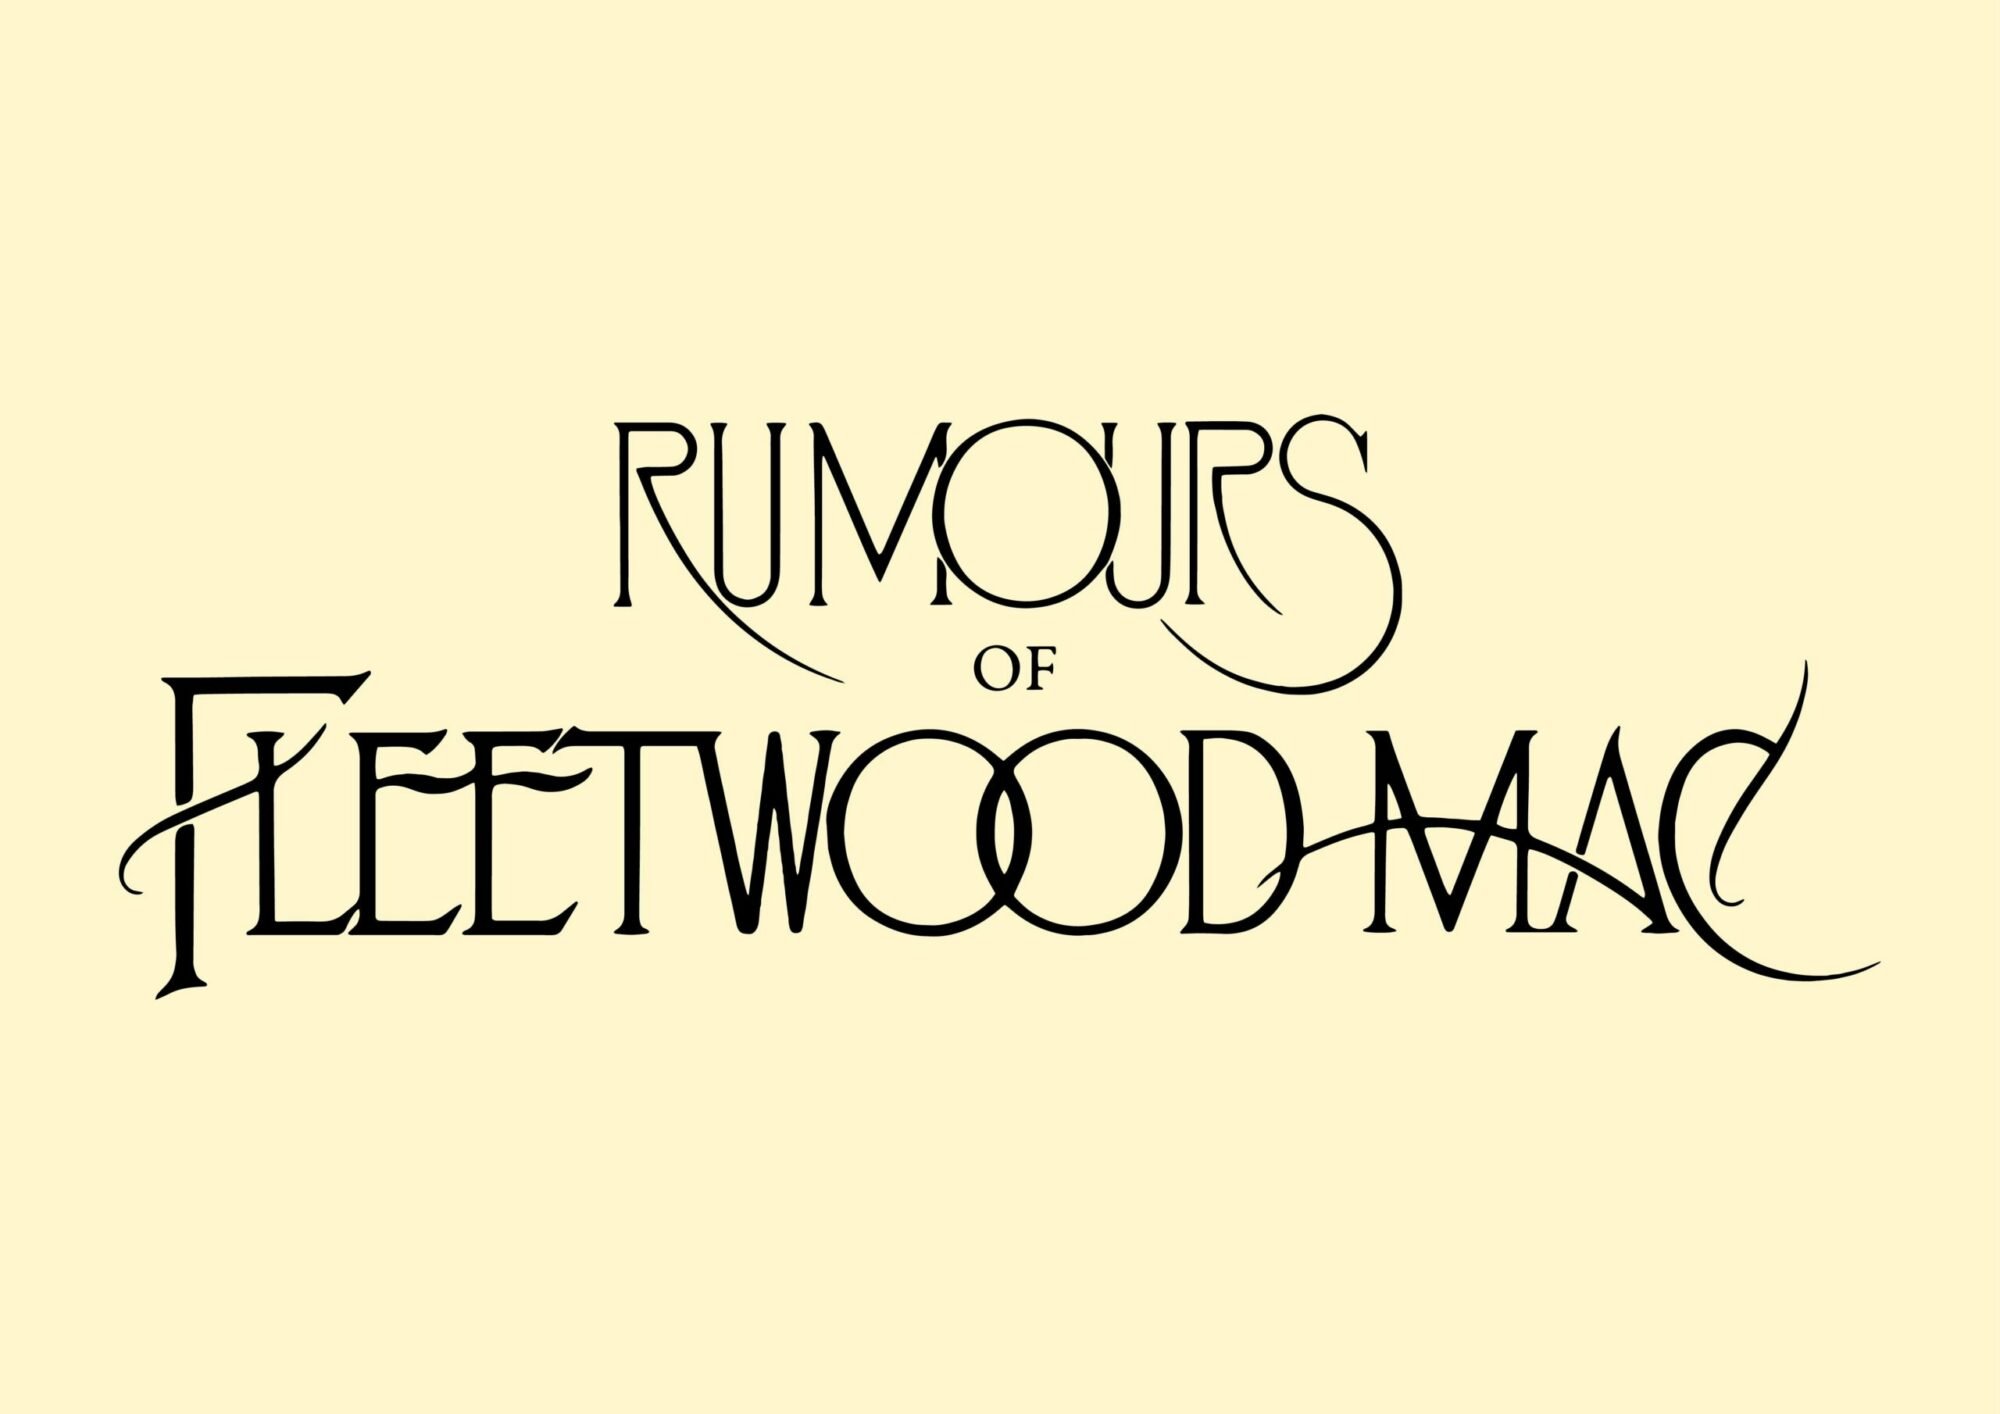 Image name Rumours of Fleetwood Mac at Sheffield City Hall Oval Hall Sheffield scaled the 19 image from the post Rumours of Fleetwood Mac 2023 at The Royal Hall, Harrogate in Yorkshire.com.